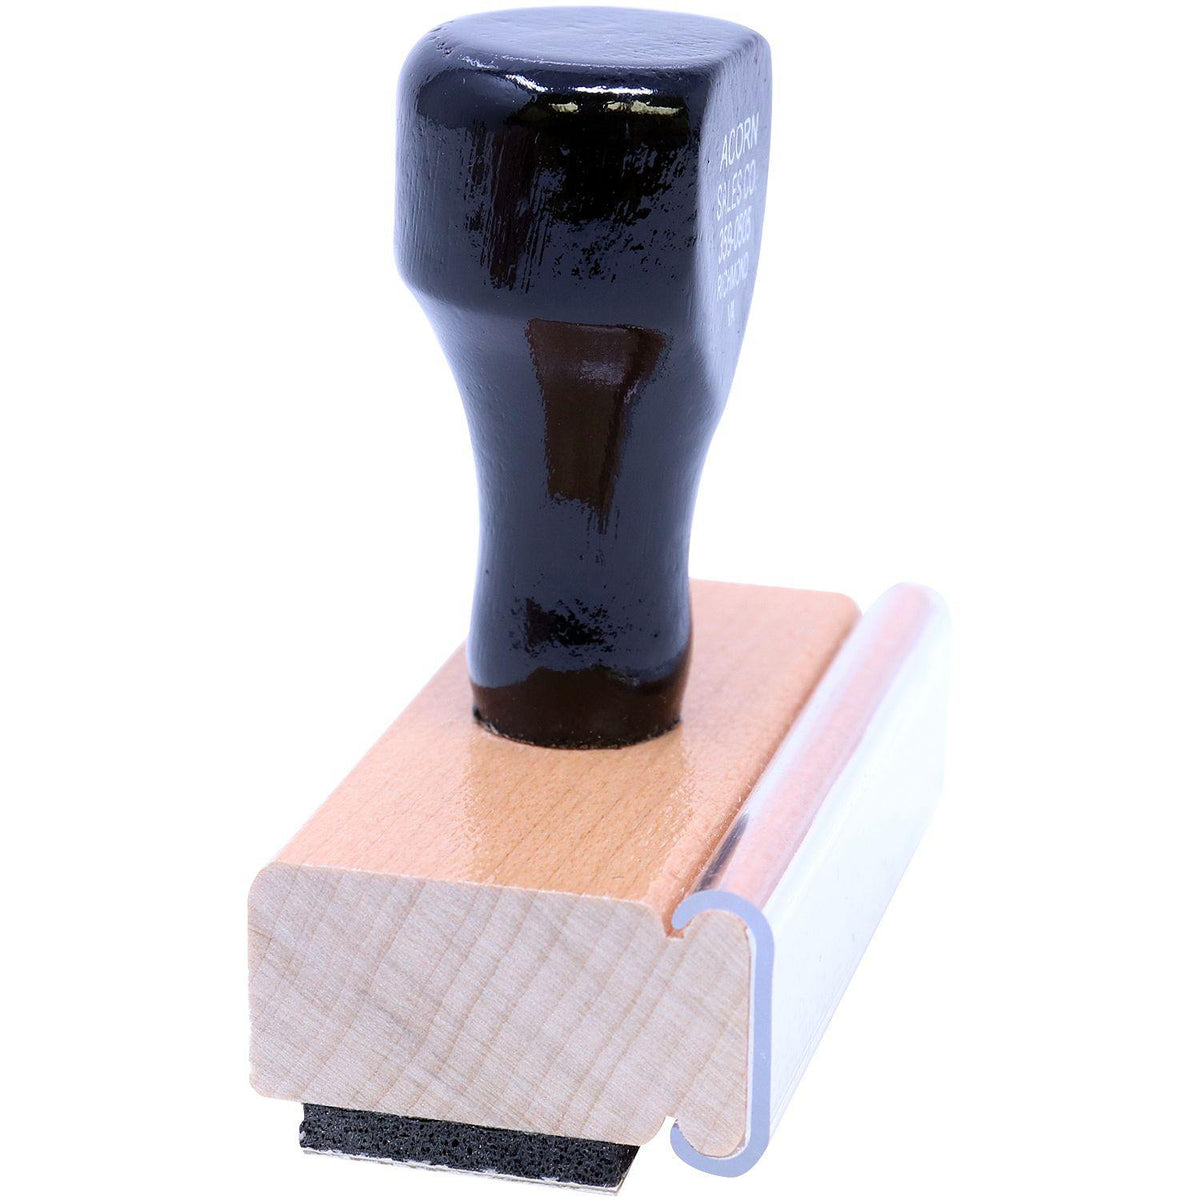 Large Thank You with Smiley Rubber Stamp - Engineer Seal Stamps - Brand_Acorn, Impression Size_Large, Stamp Type_Regular Stamp, Type of Use_General, Type of Use_Teacher